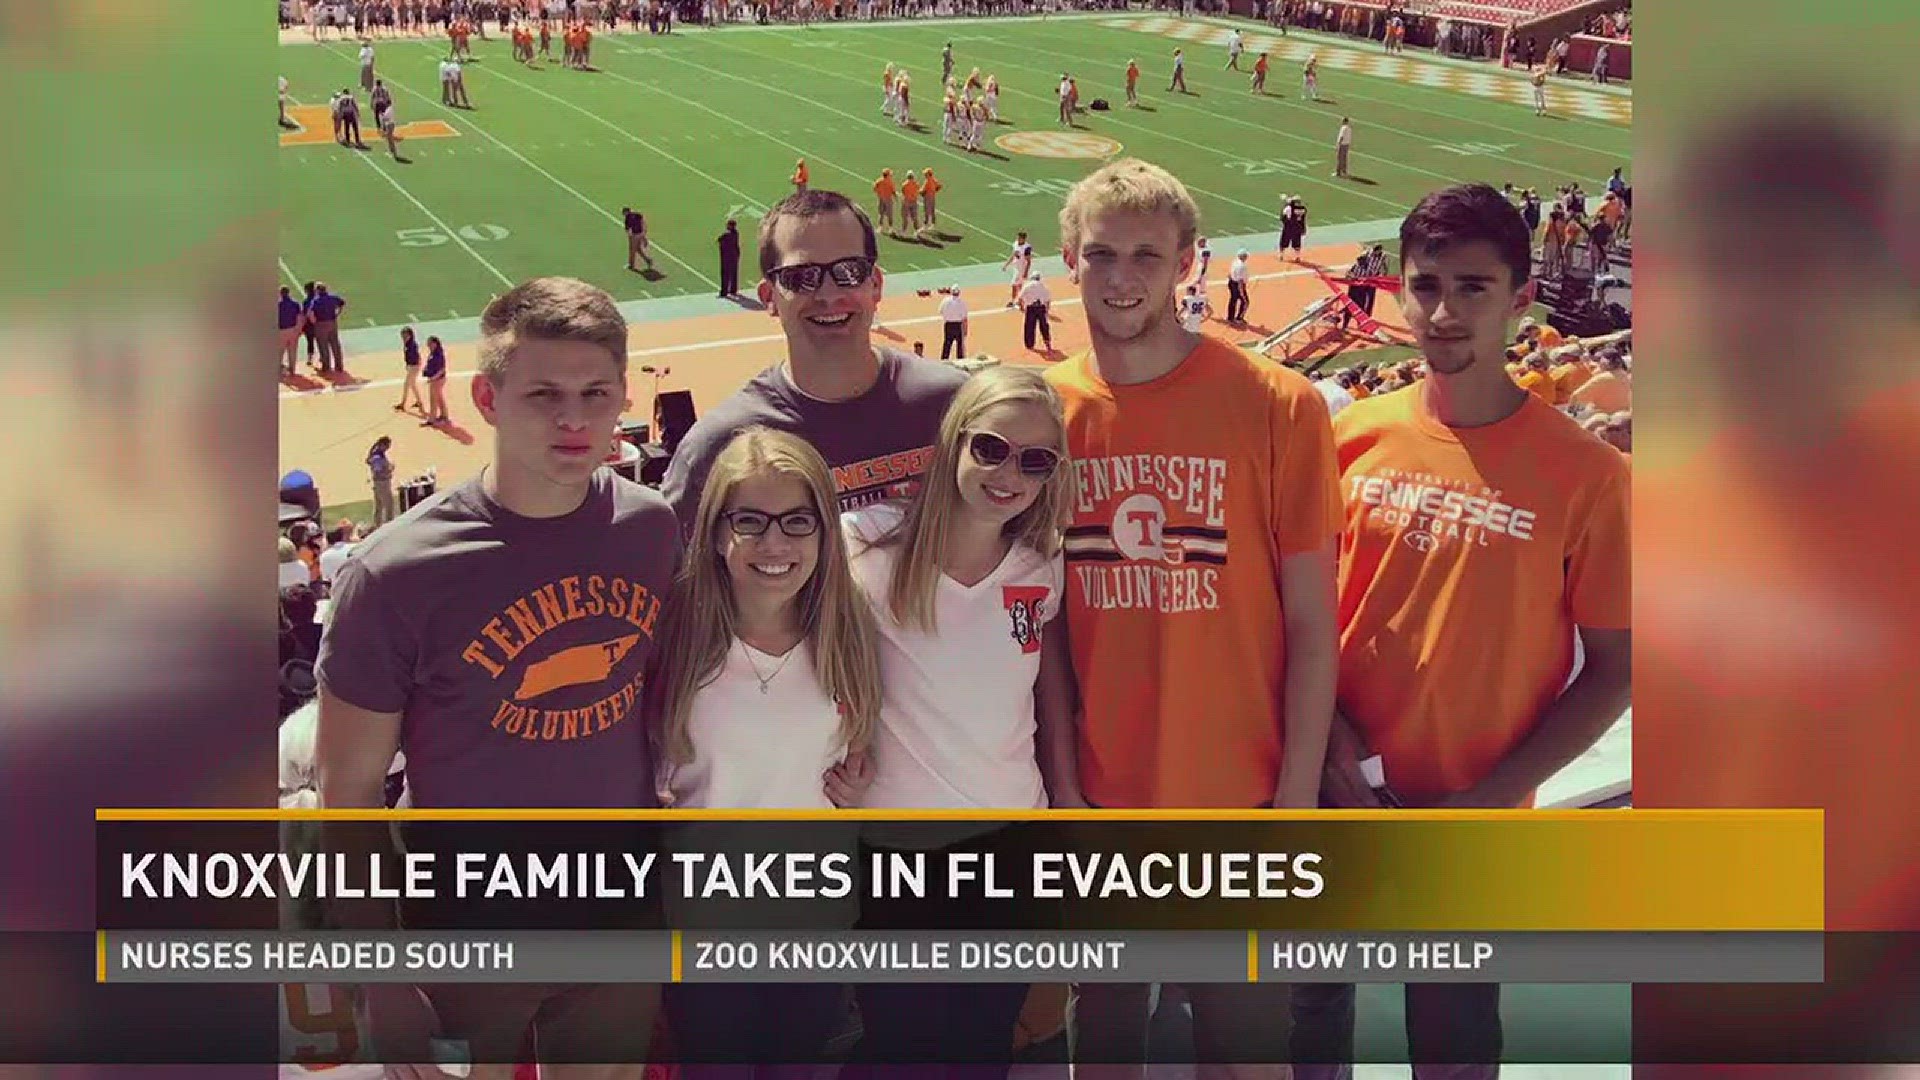 College students from Florida are watching Hurricane Irma coverage with a Knoxville family who offered them a place to stay.